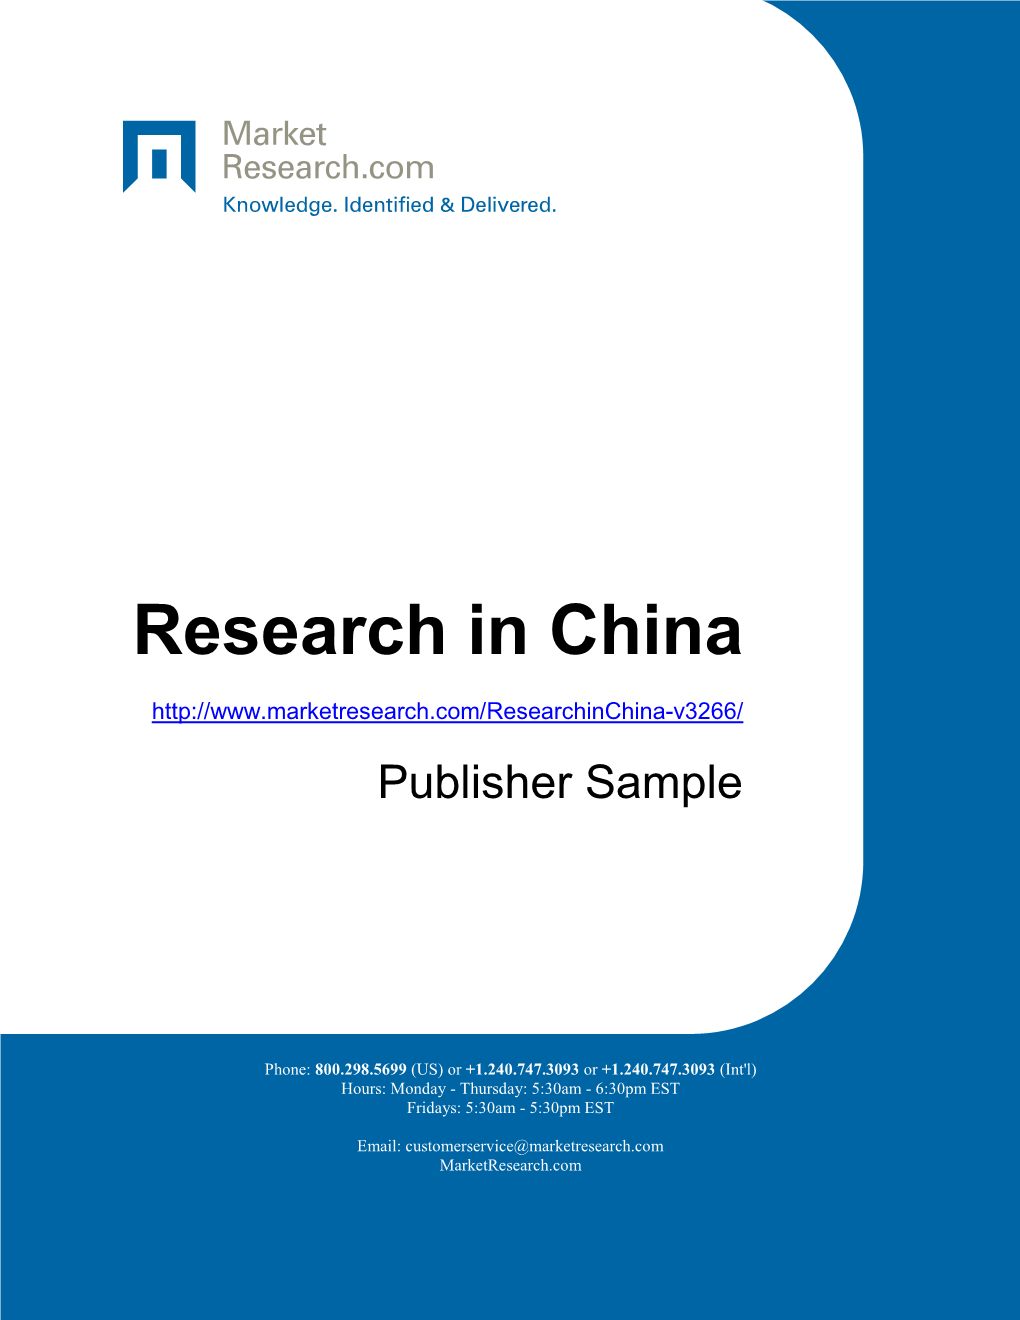 Research in China